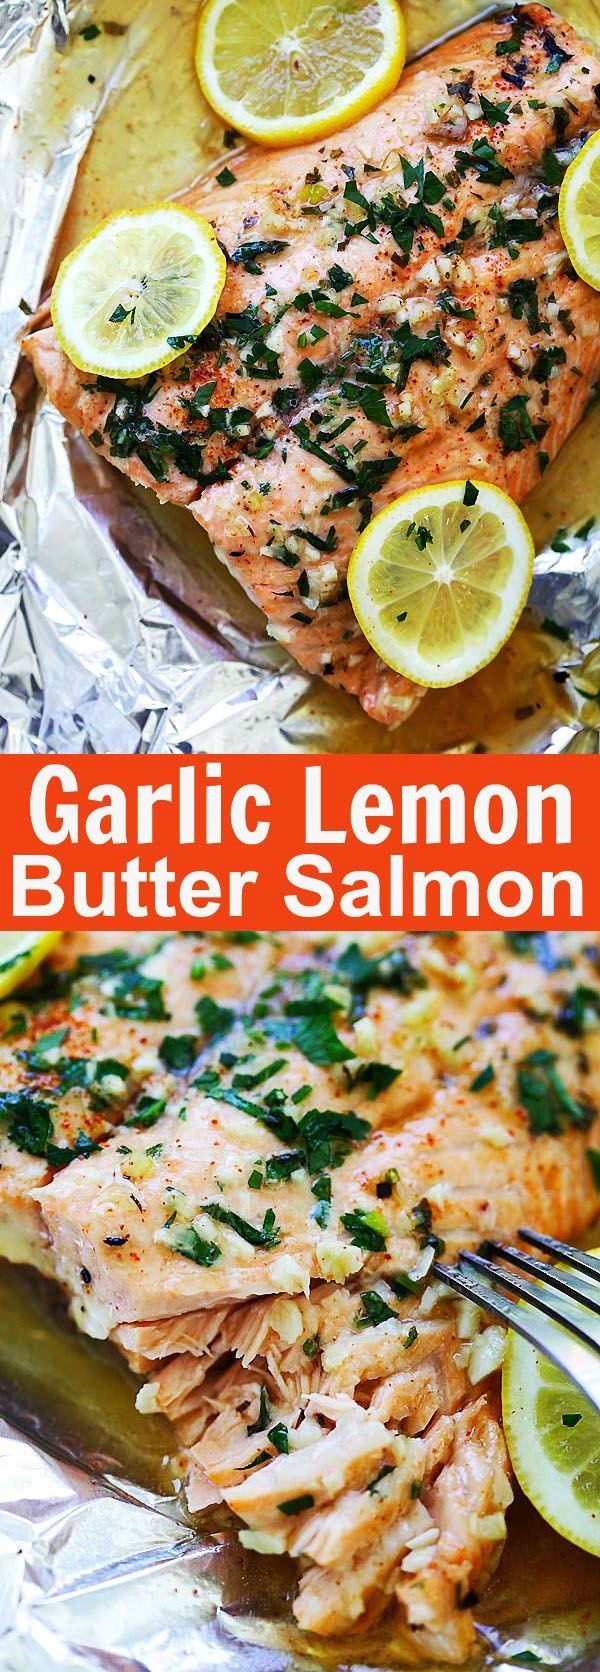 Garlic Lemon Butter Salmon – the easiest foil-wrapped salmon recipe ever with crazy delicious salmon in garlic lemon butter sauce. So good | rasamalaysia.com -   25 dash diet salmon
 ideas